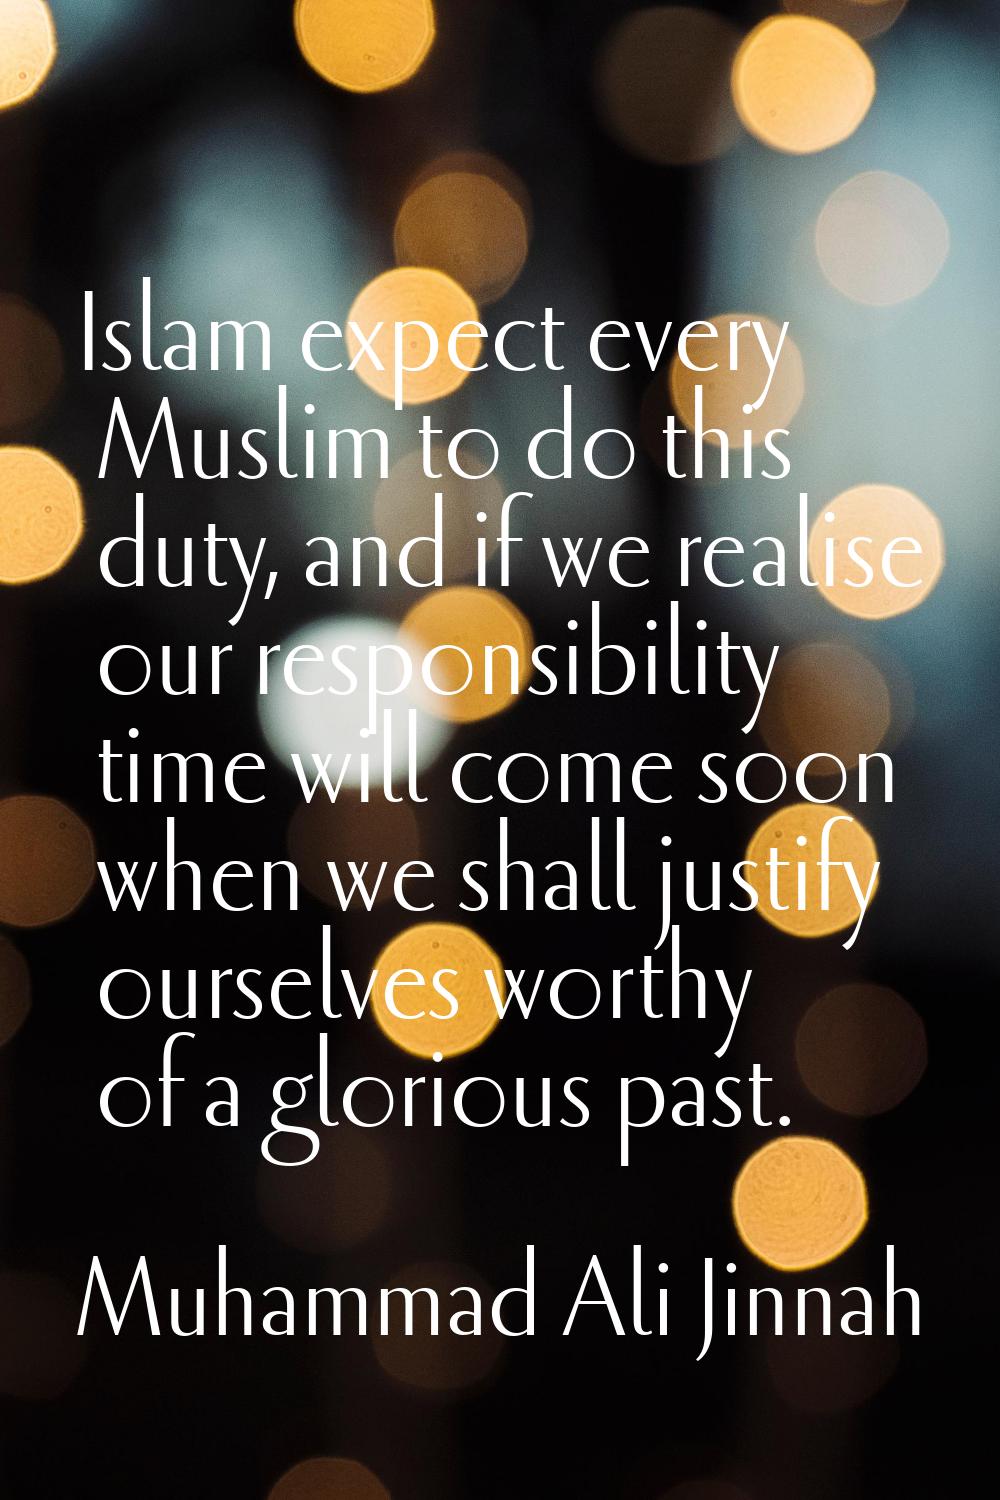 Islam expect every Muslim to do this duty, and if we realise our responsibility time will come soon